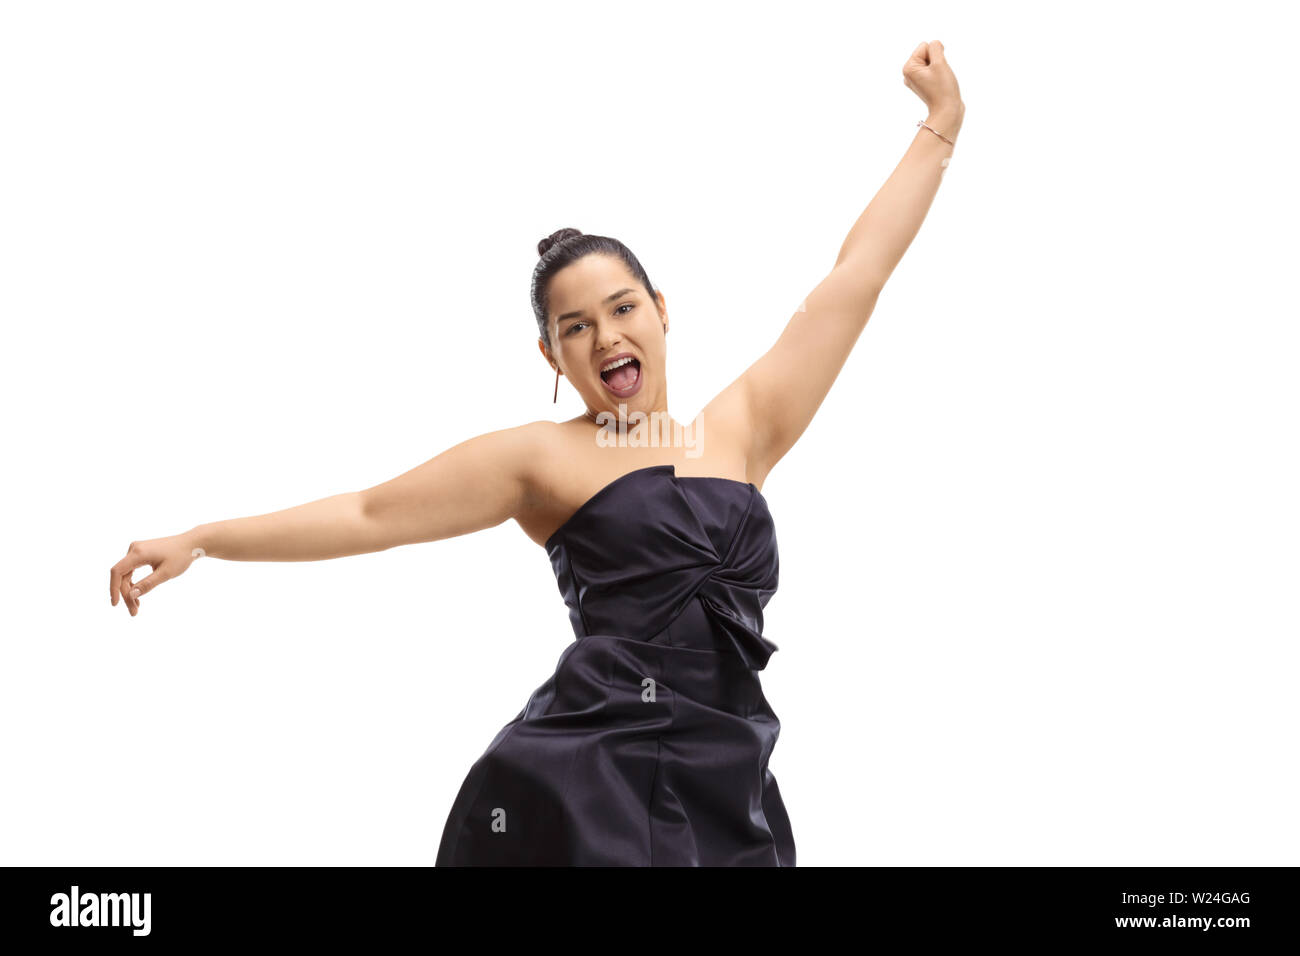 Young woman in an elegant dress jumping and gesturing happiness isolated on white background Stock Photo